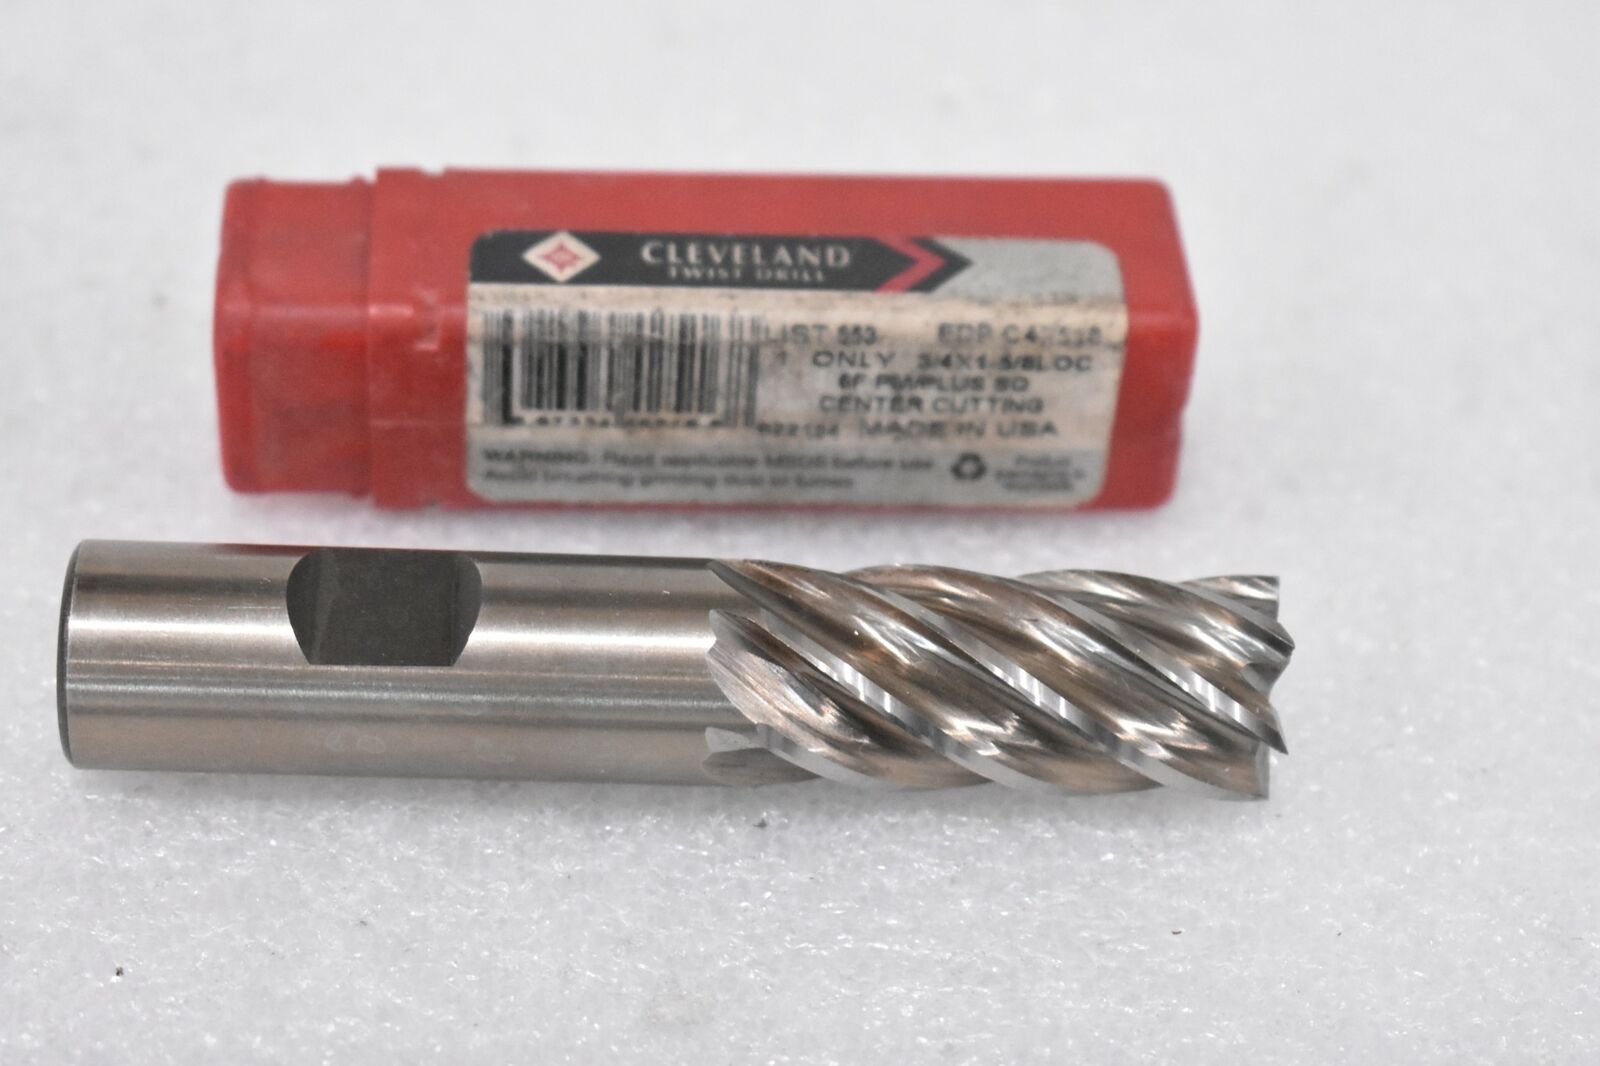 CLEVELAND Omaha store Mall C42516 SQUARE END MILL LIST PM-4 CUT OF 6- 4X1-5 8